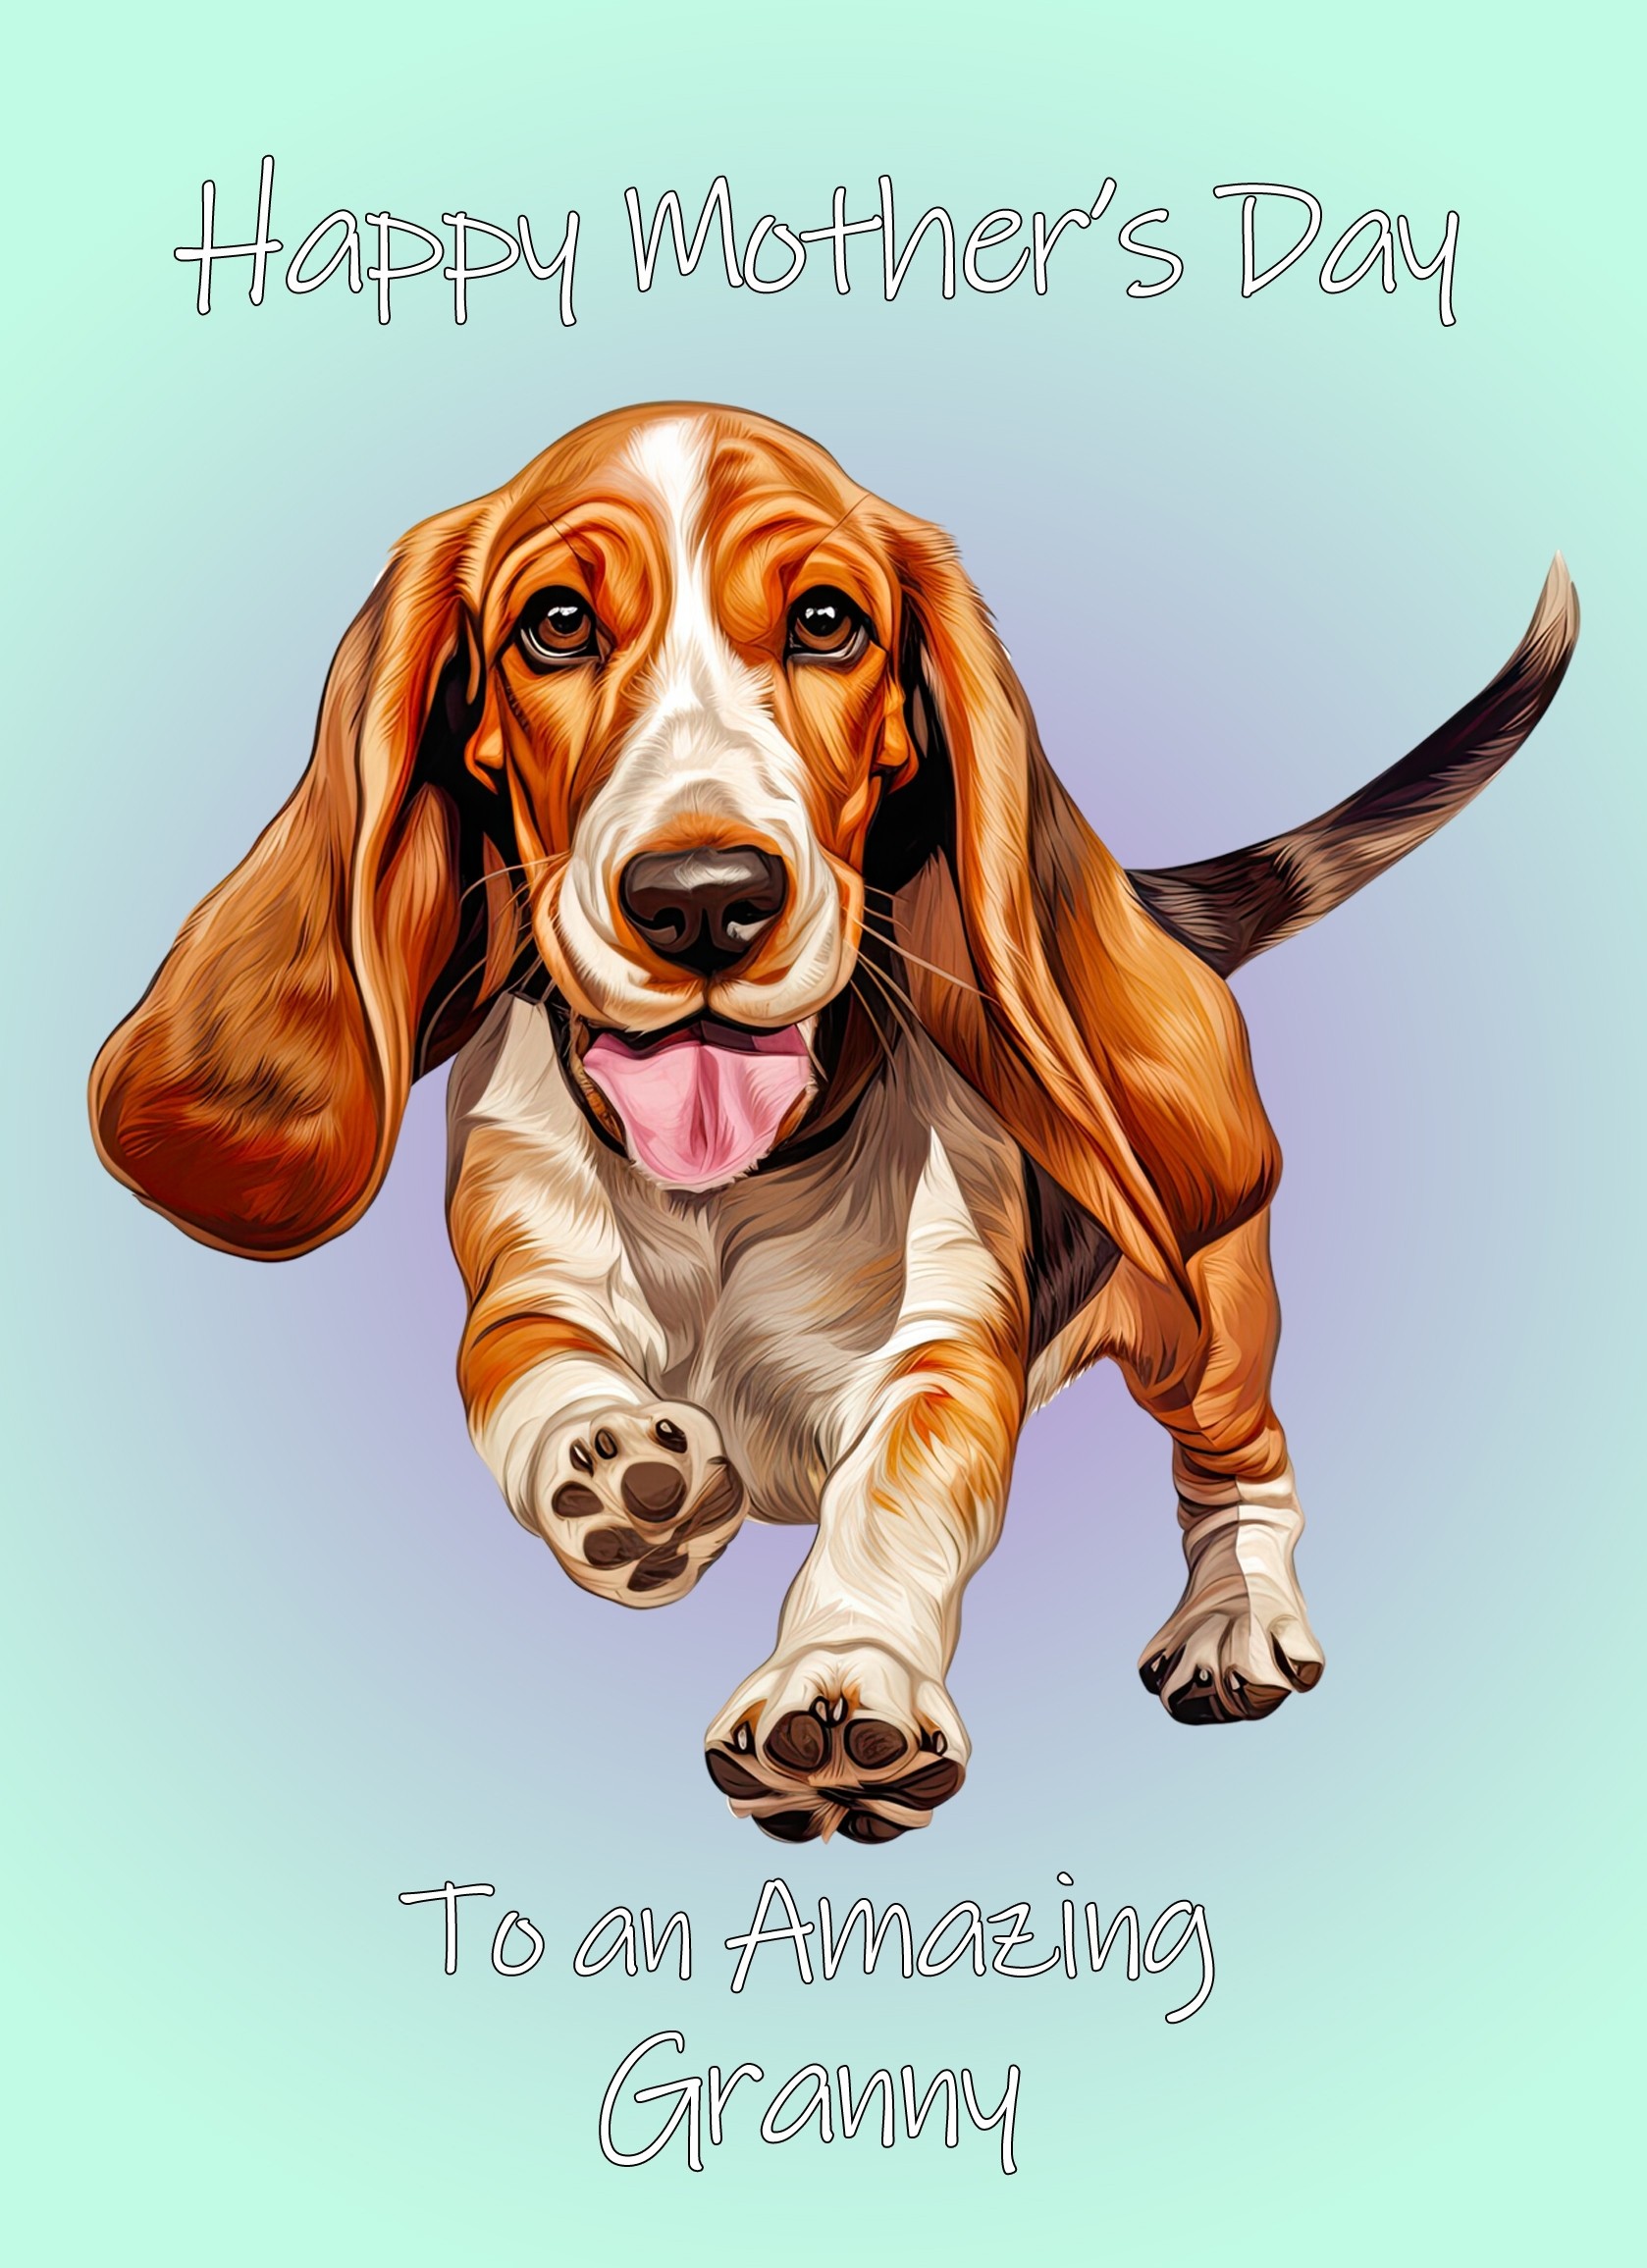 Basset Hound Dog Mothers Day Card For Granny